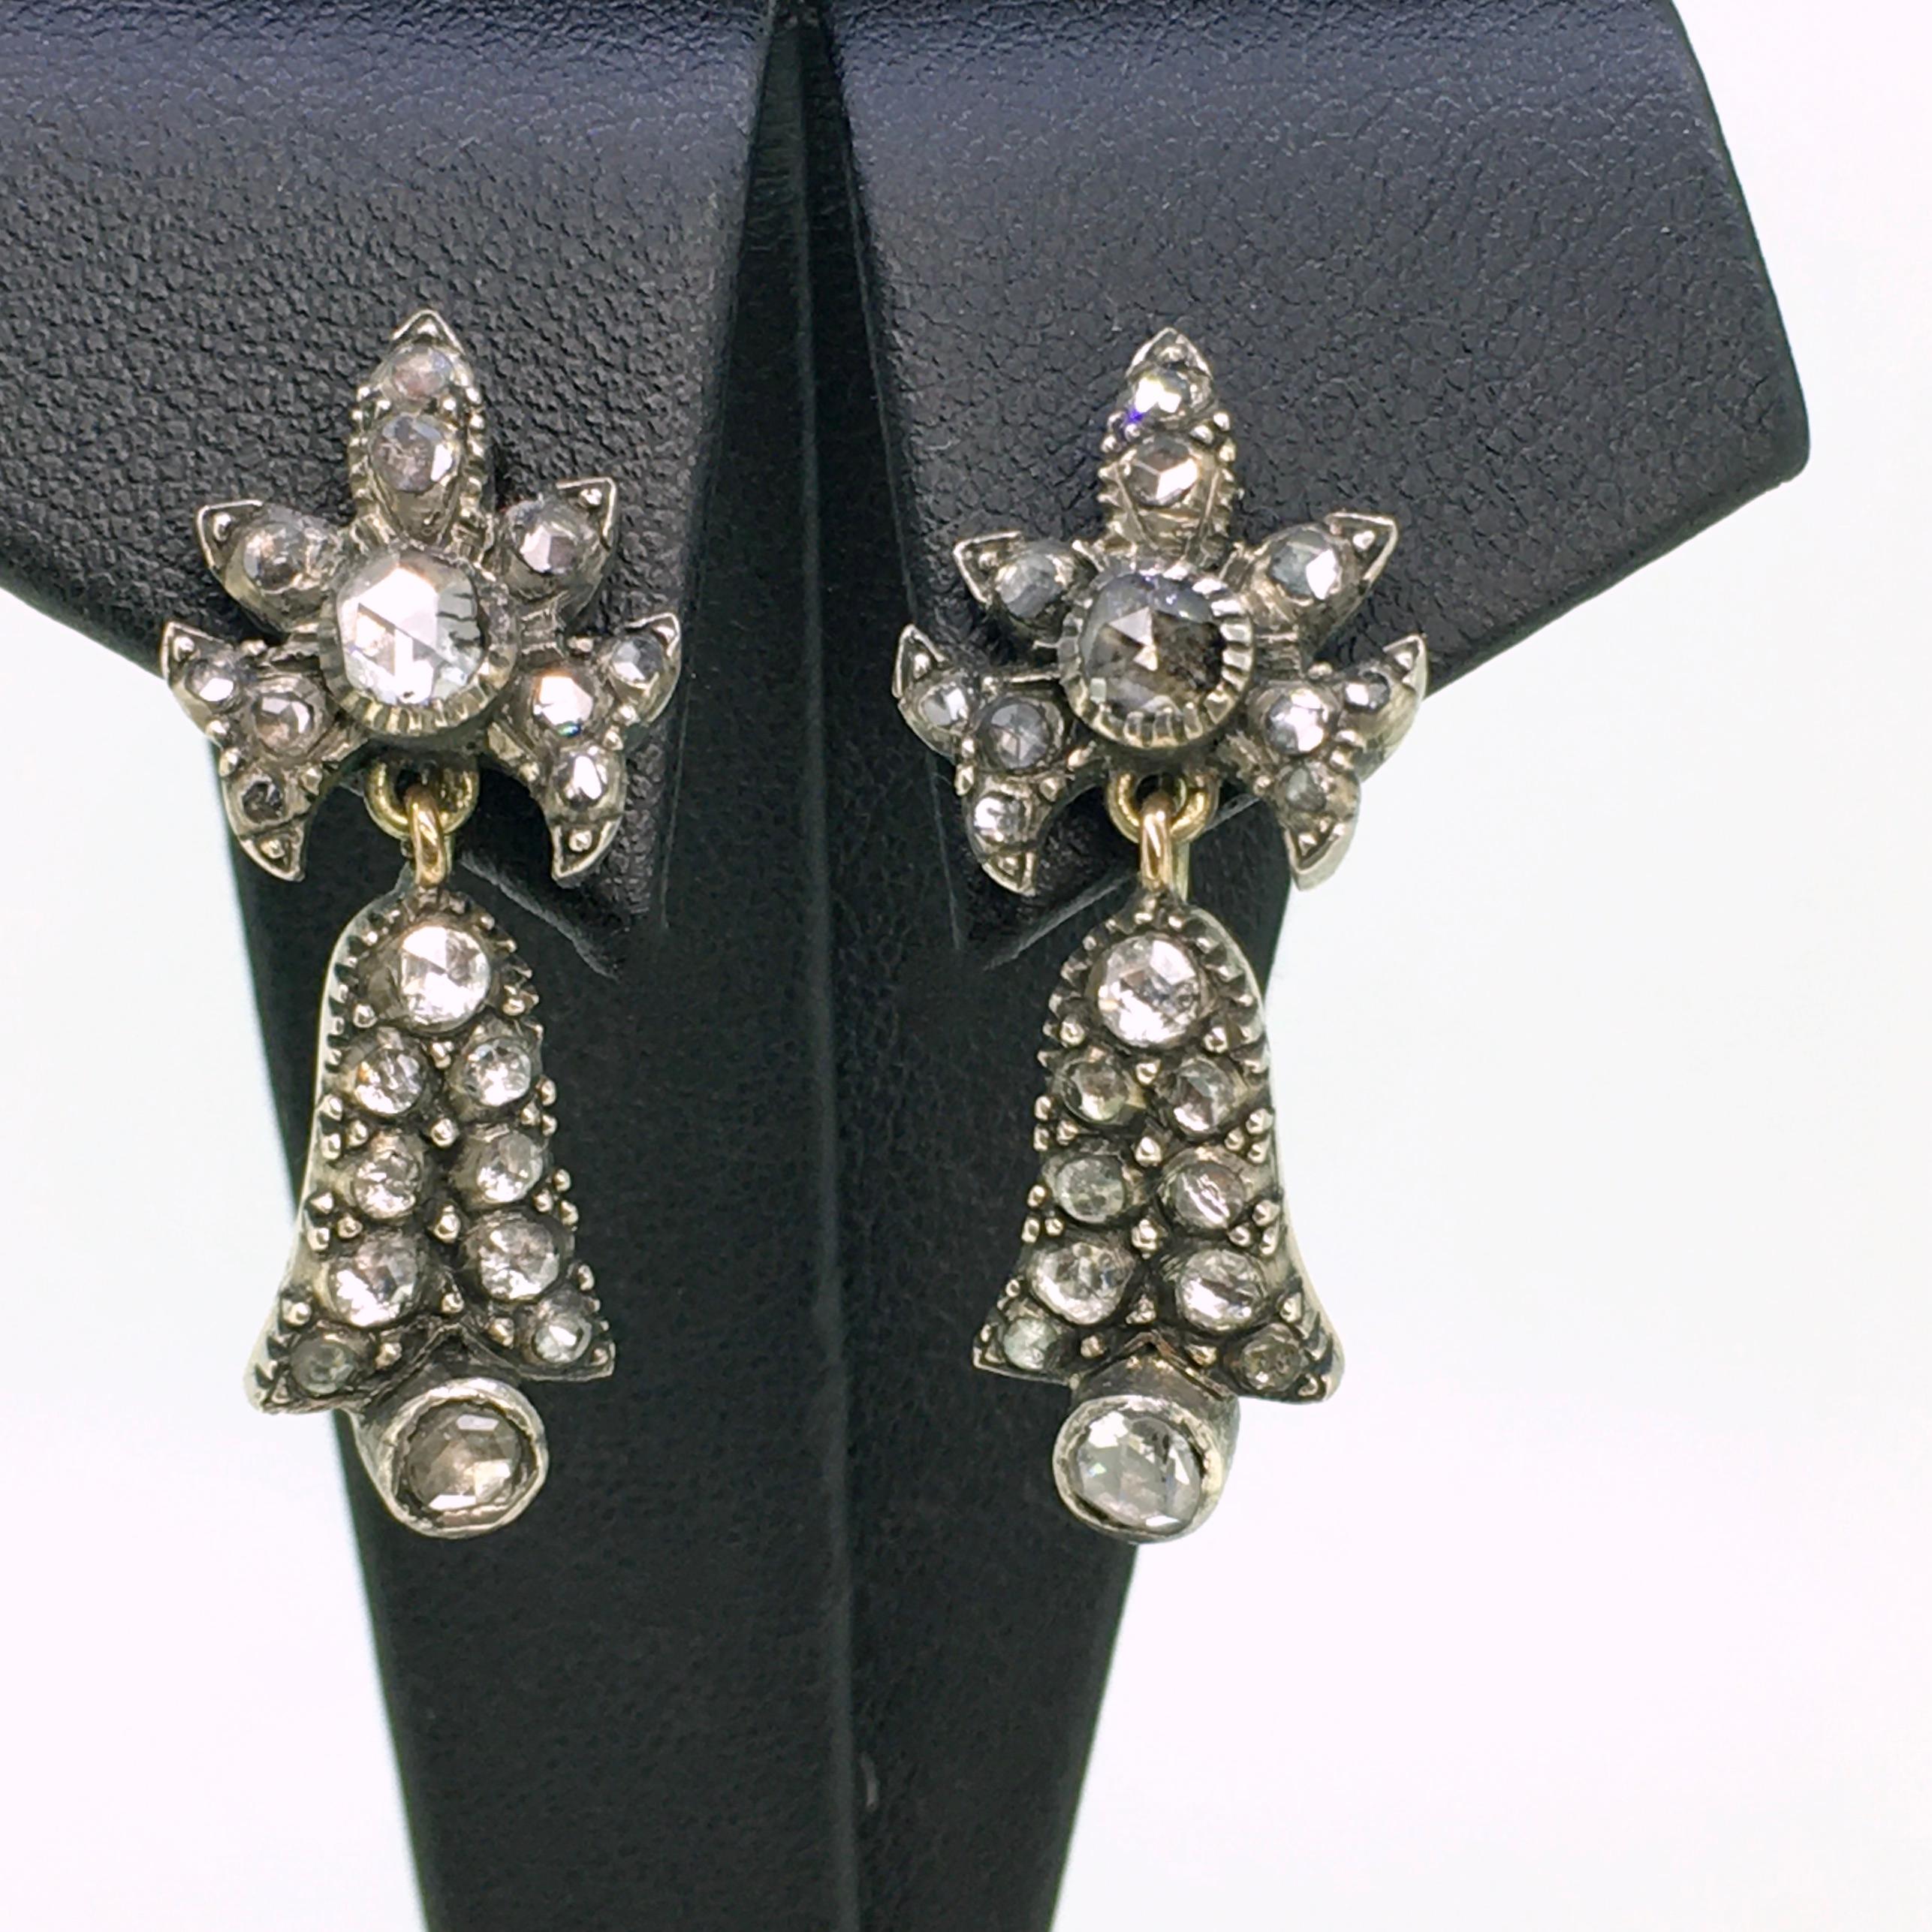 Earrings handmade in silver and gold, set with rose cut diamonds date from 1830, made in the Netherlands.
This elegant pair shows details of the Georgian period. They are a quintessential Romantic piece of jewelry, dangling and moving elegantly to